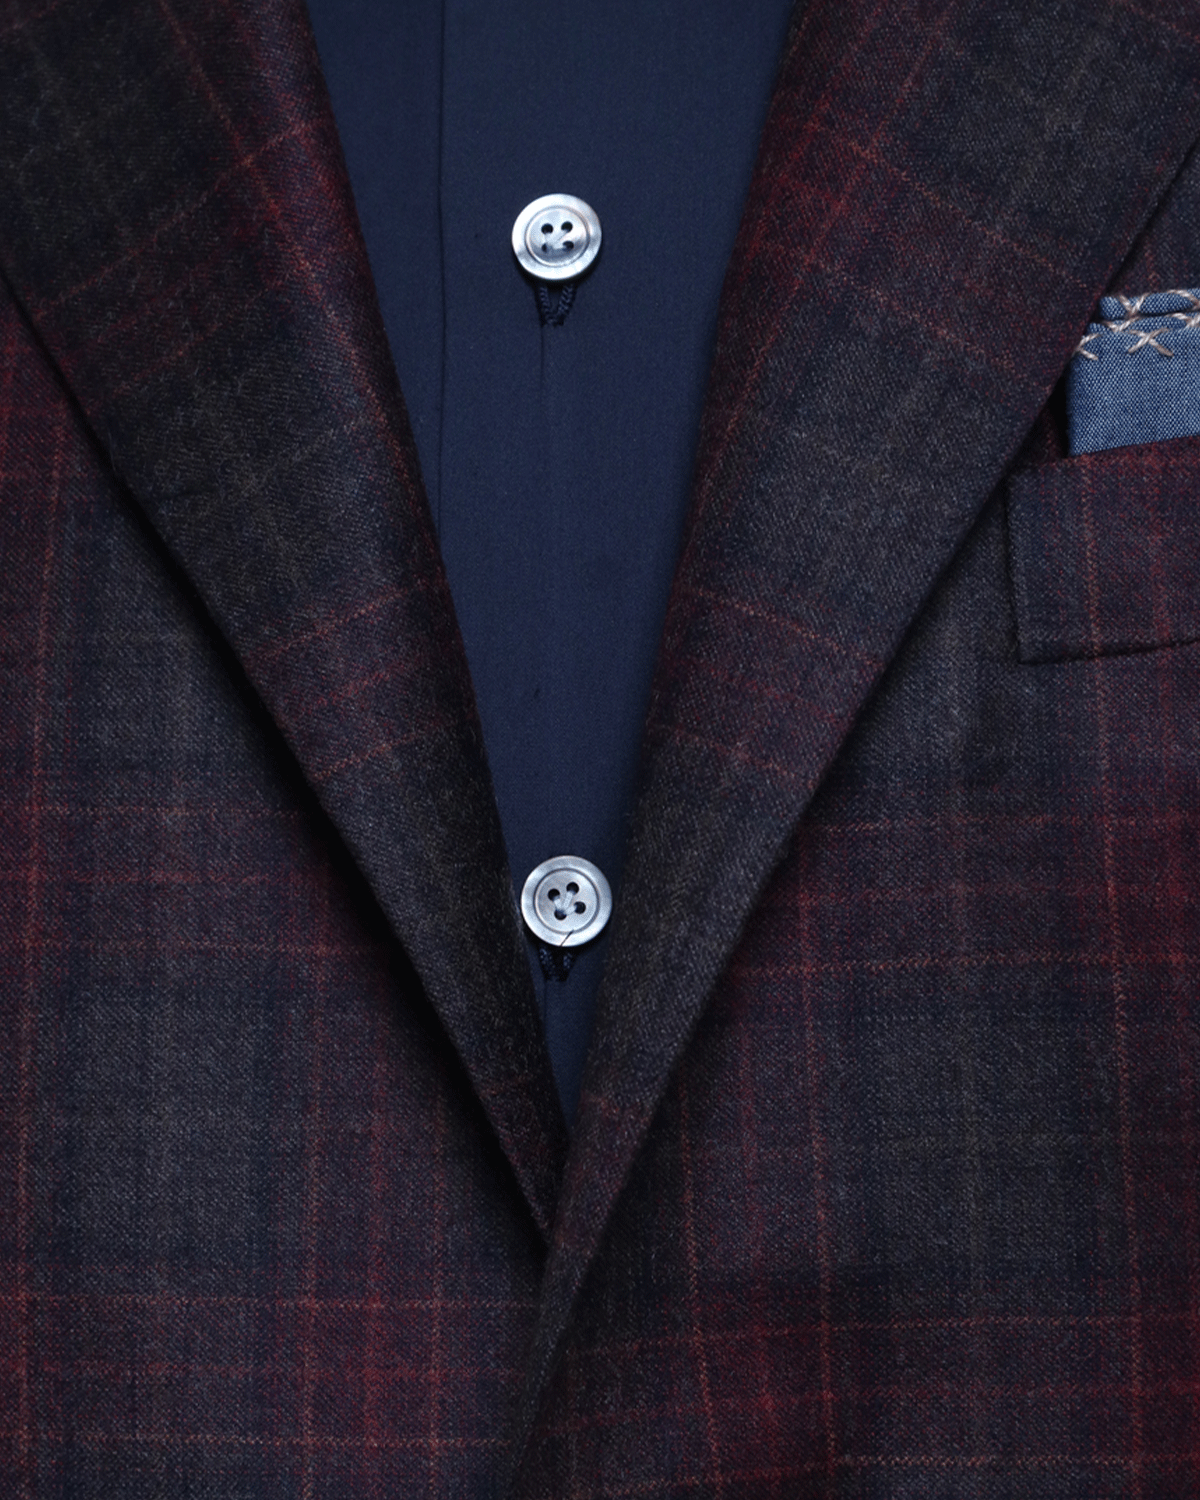 Red and Brown Windowpane Plaid Deconstructed Wool Sportcoat